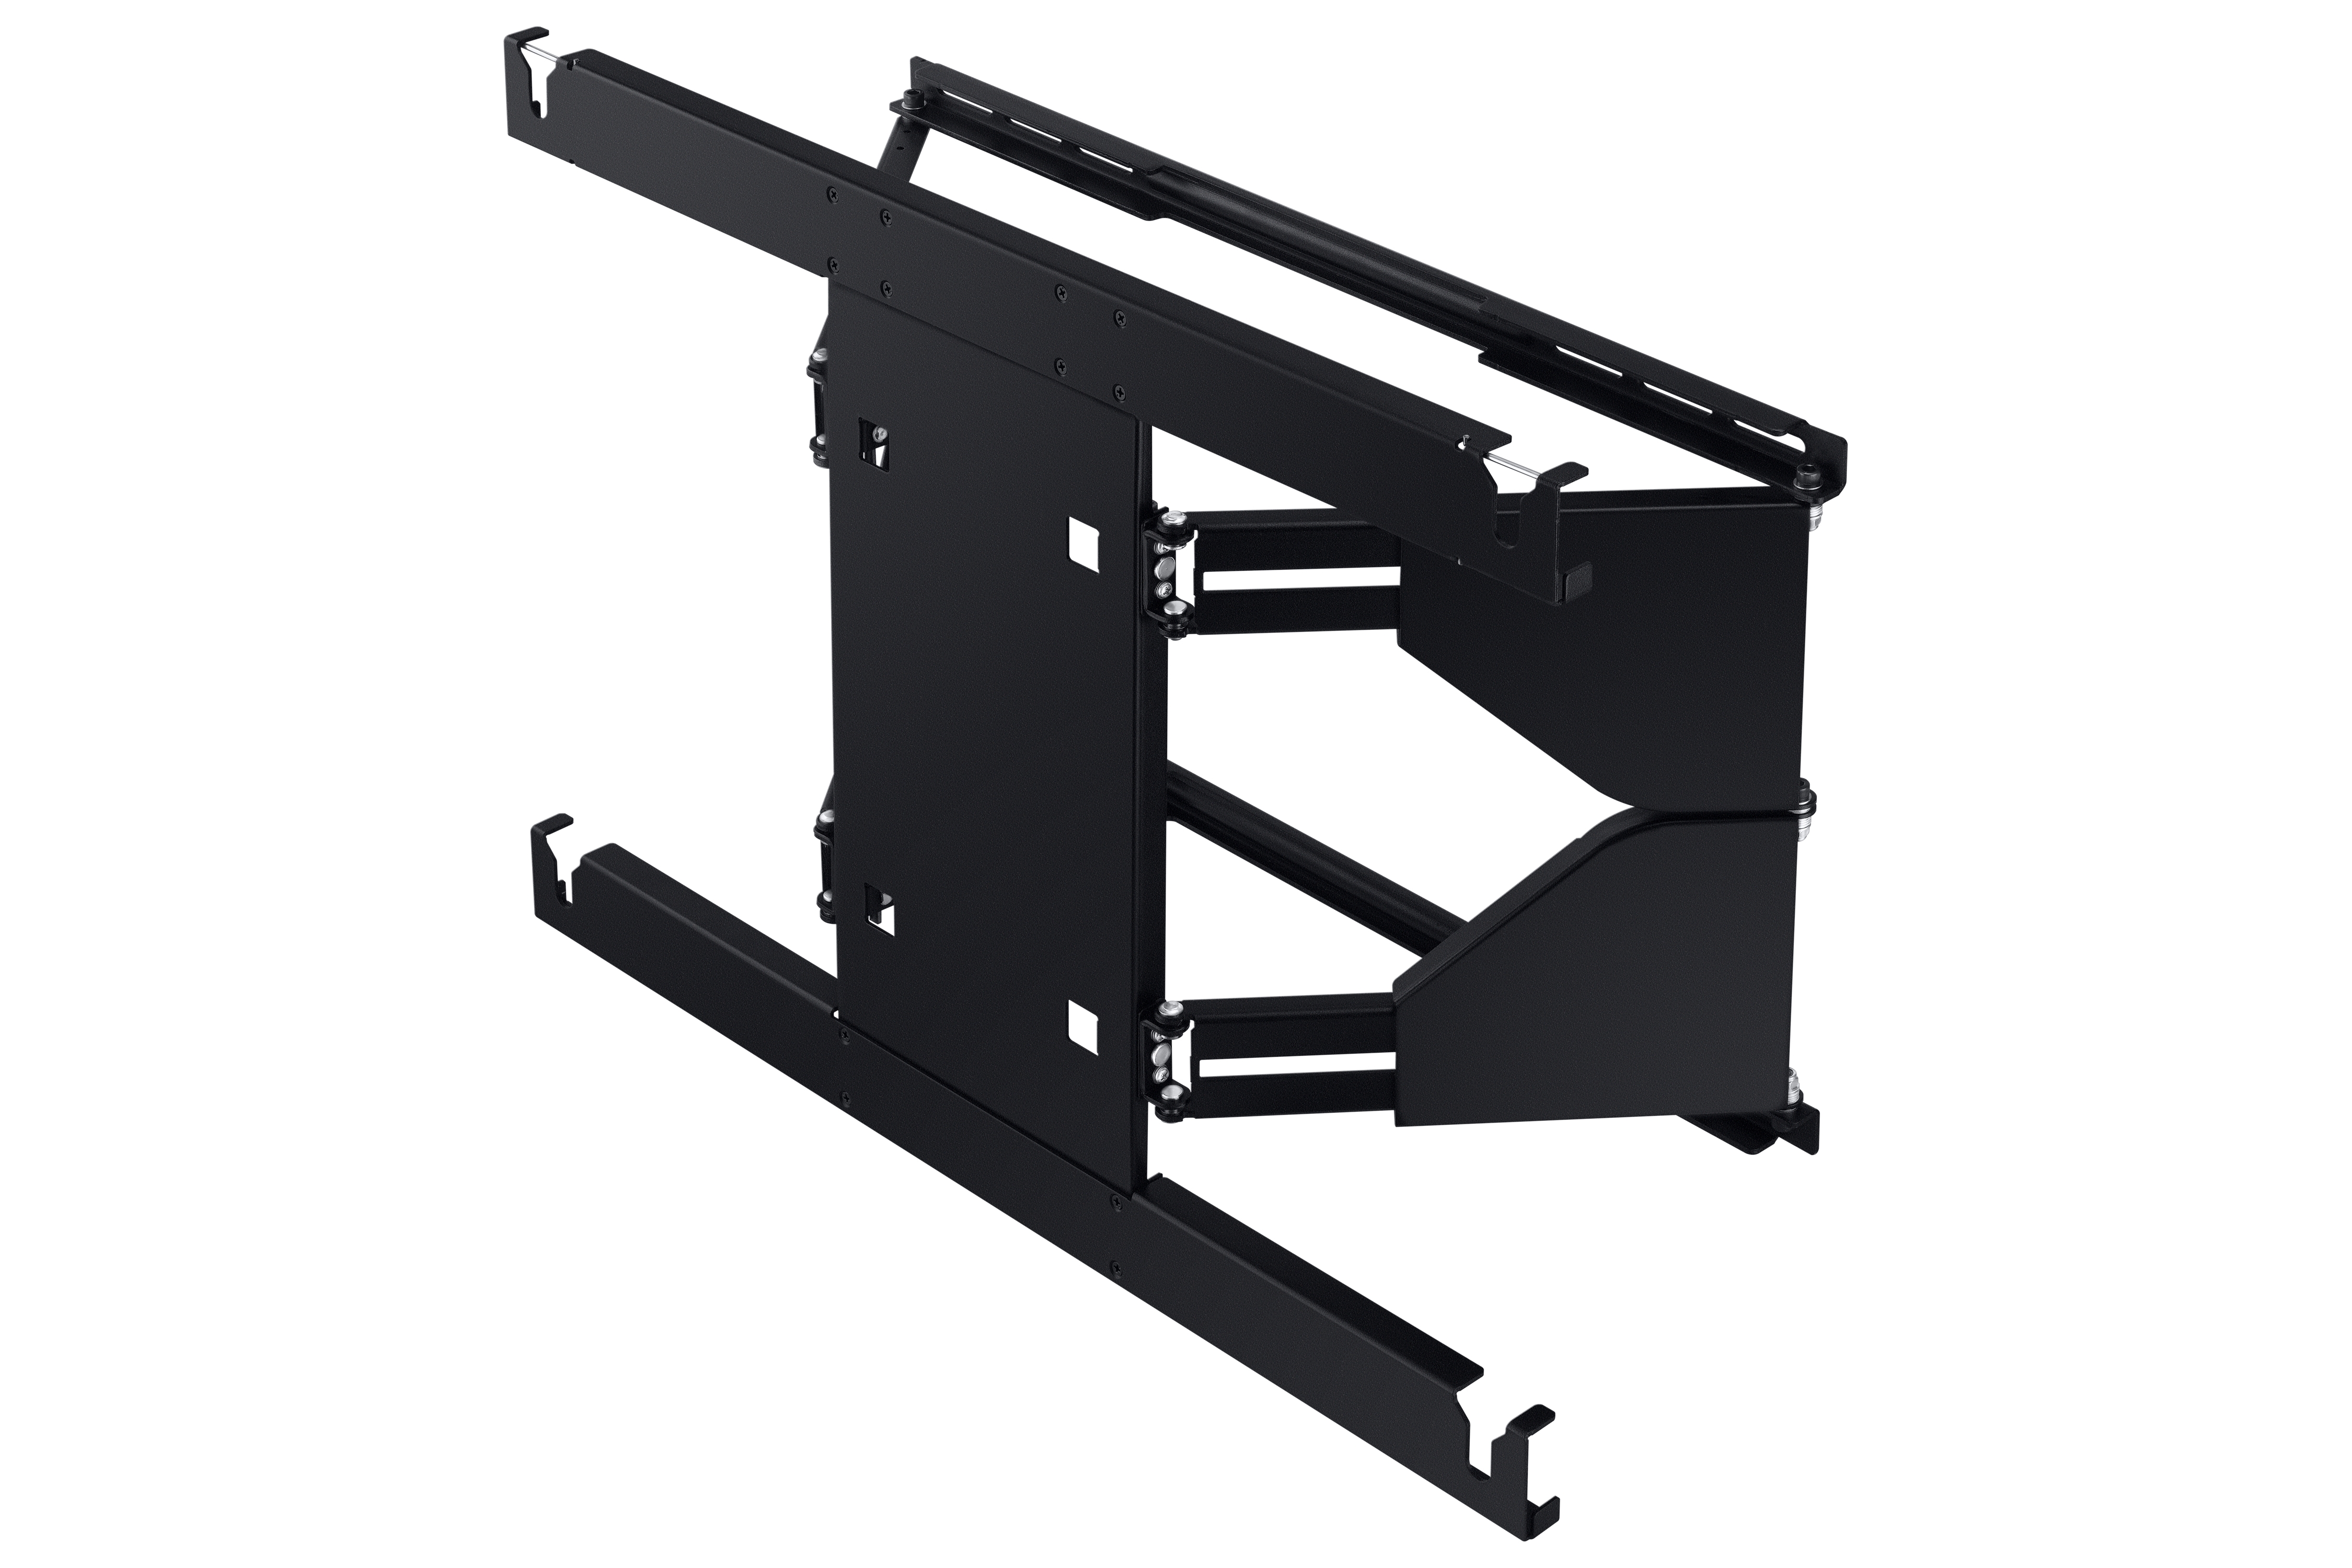 SAMSUNG Full Motion Slim TV Wall Mount, Fits 82”and 85” TVs, Minimizes  TV-to-Wall Gap, Adjustable Left and Right, Tilt and Swivel, VESA 600x400,  Black